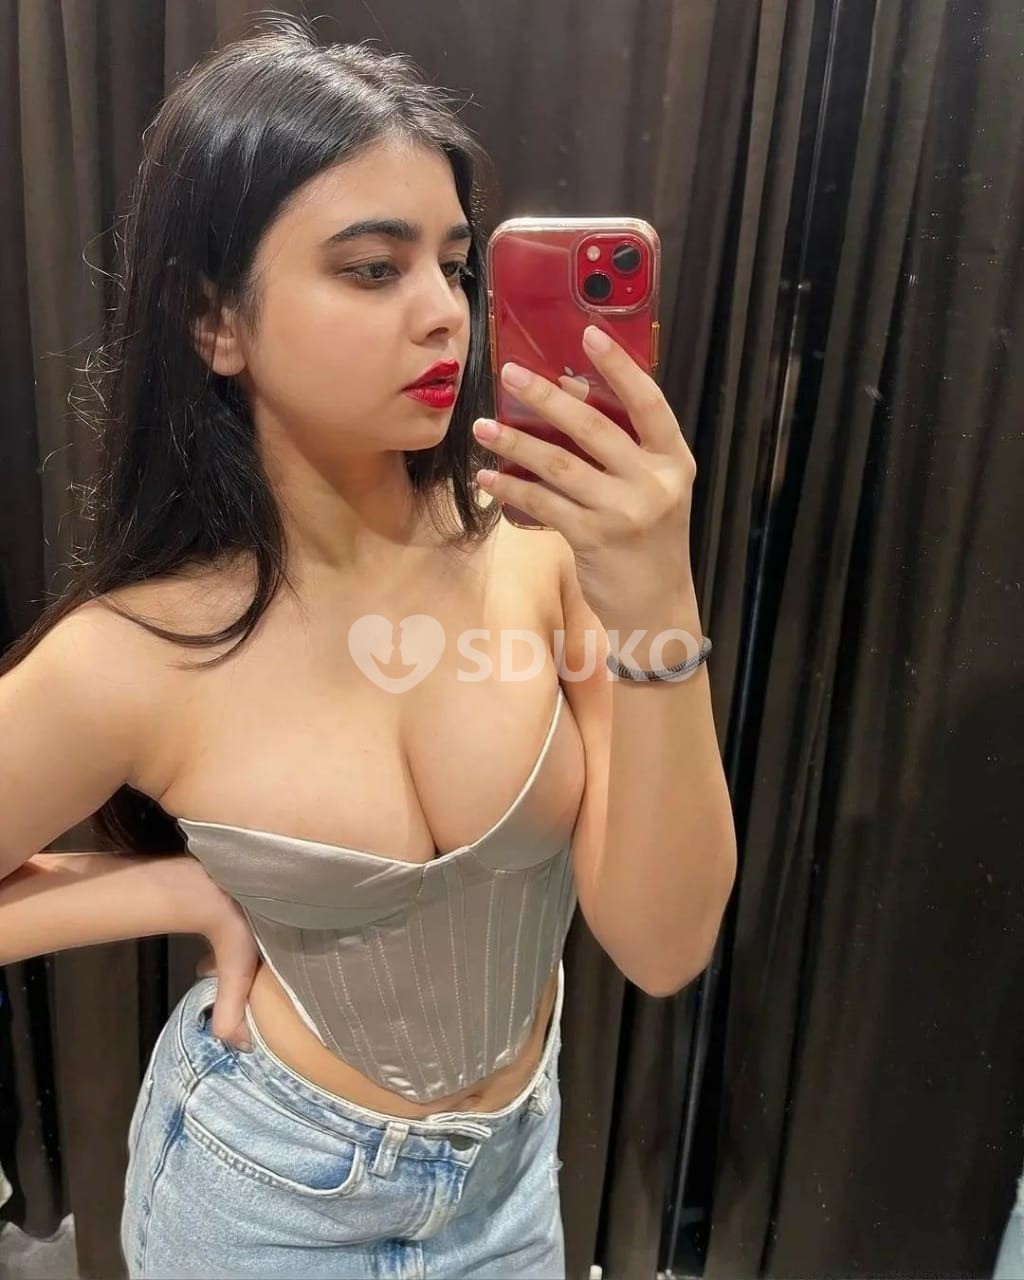 PUNE ALL AREA VIP TODAY LOW 🌛;/PRICE ESCORT 🥰SERVICE 100% SAFE AND SECURE ANYTIME CALL ME 24 X 7 SERVICE AVAILABLE